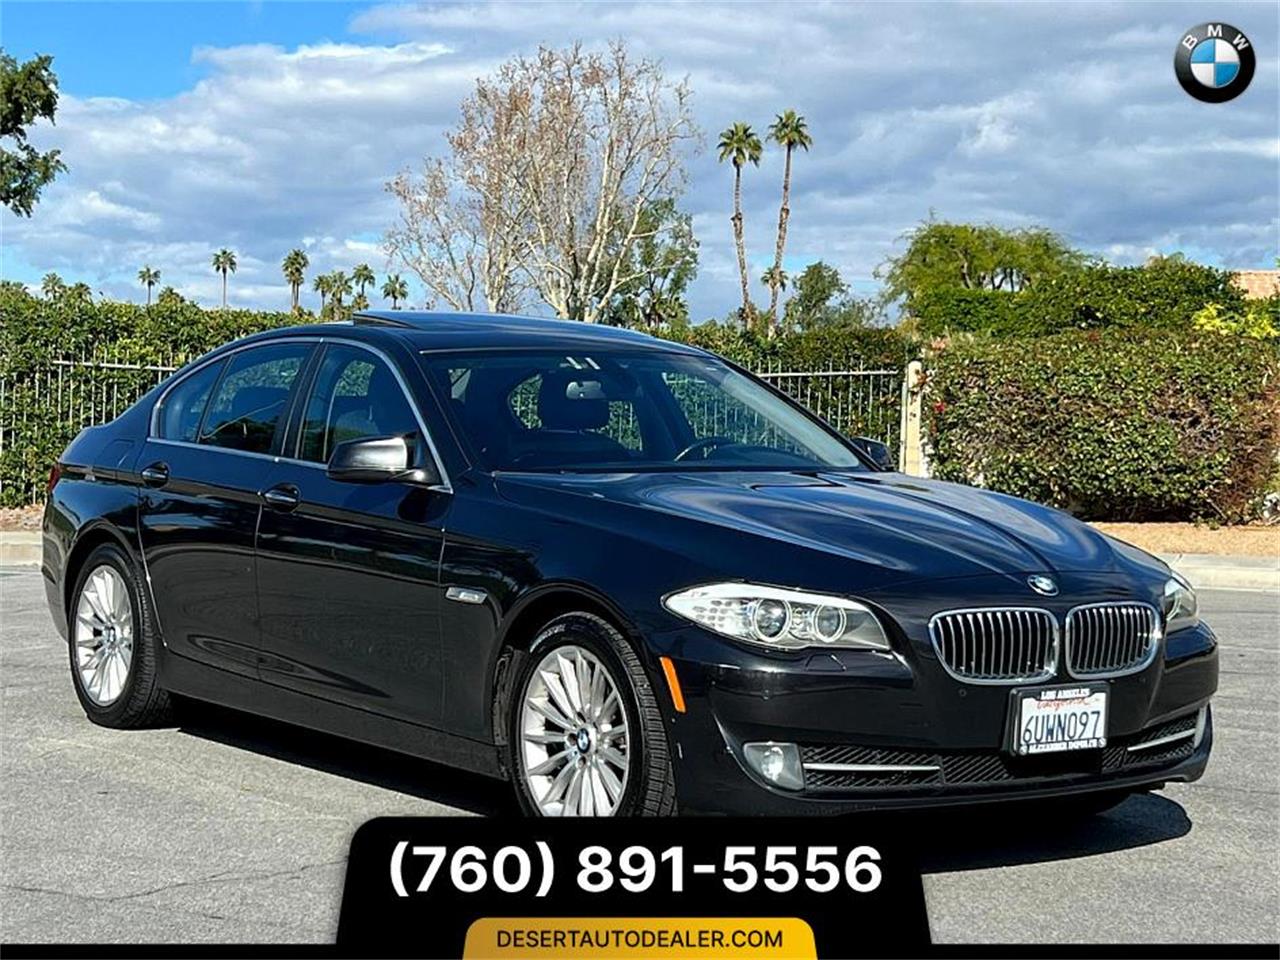 For Sale: 2012 BMW 5 Series in Palm Desert, California for sale in Palm Desert, CA